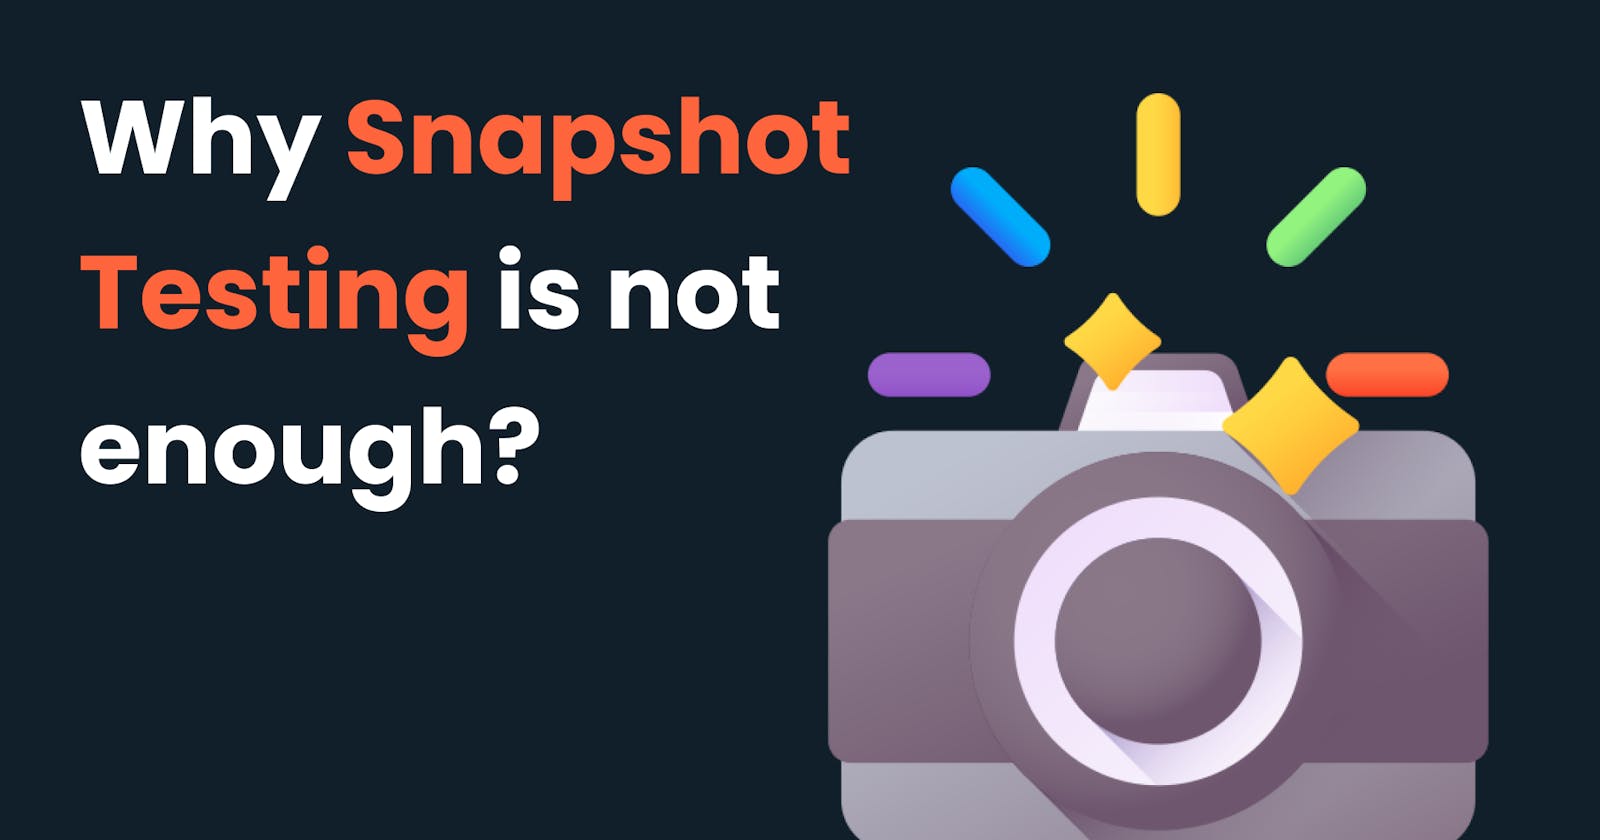 Why snapshot testing is not enough?